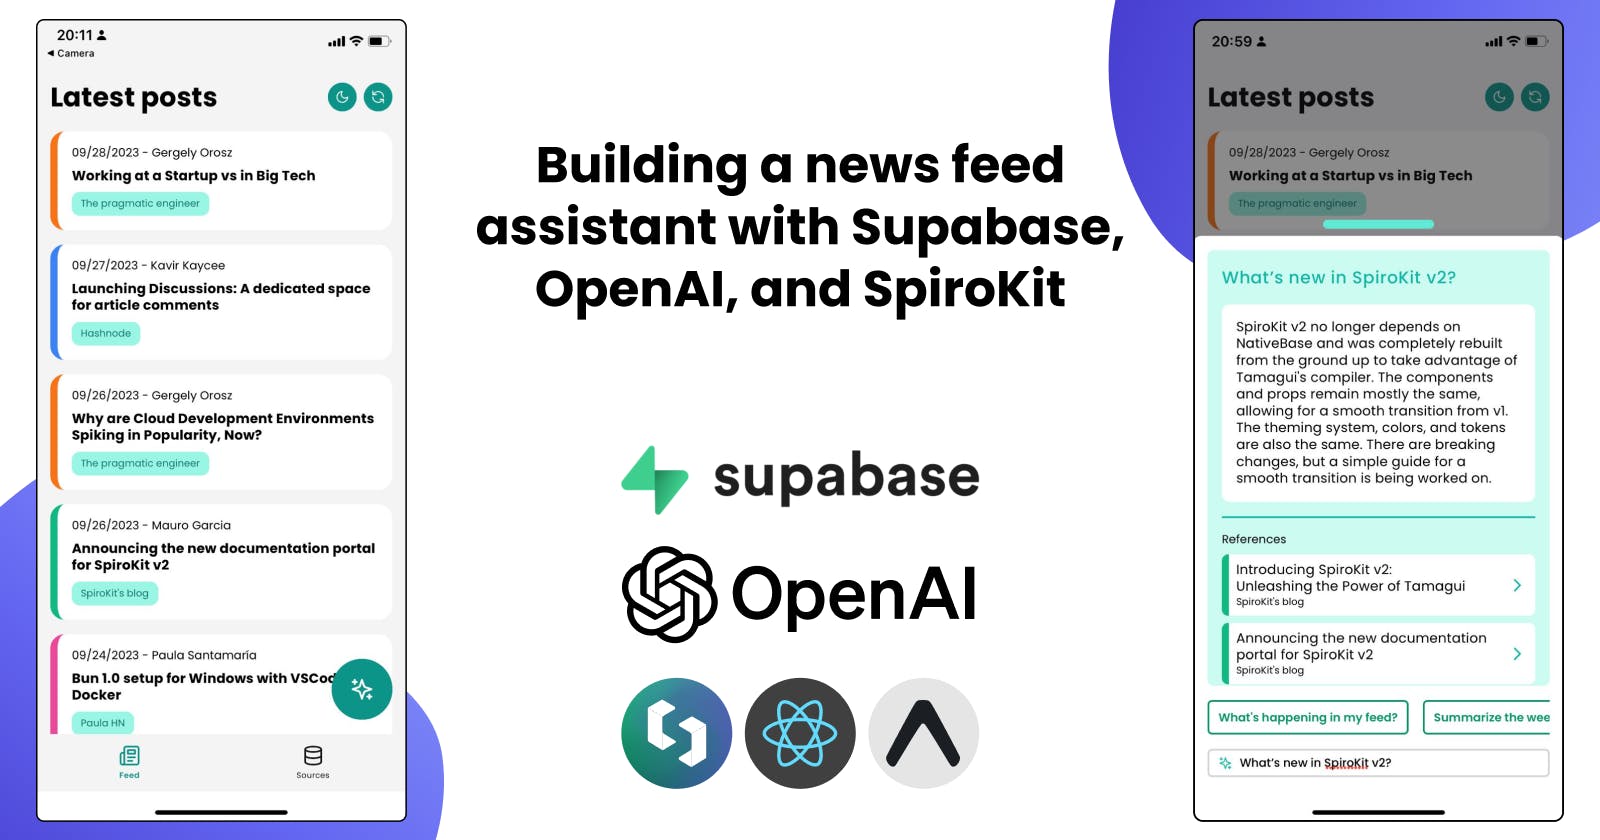 Building a news feed assistant with Supabase, OpenAI, and SpiroKit